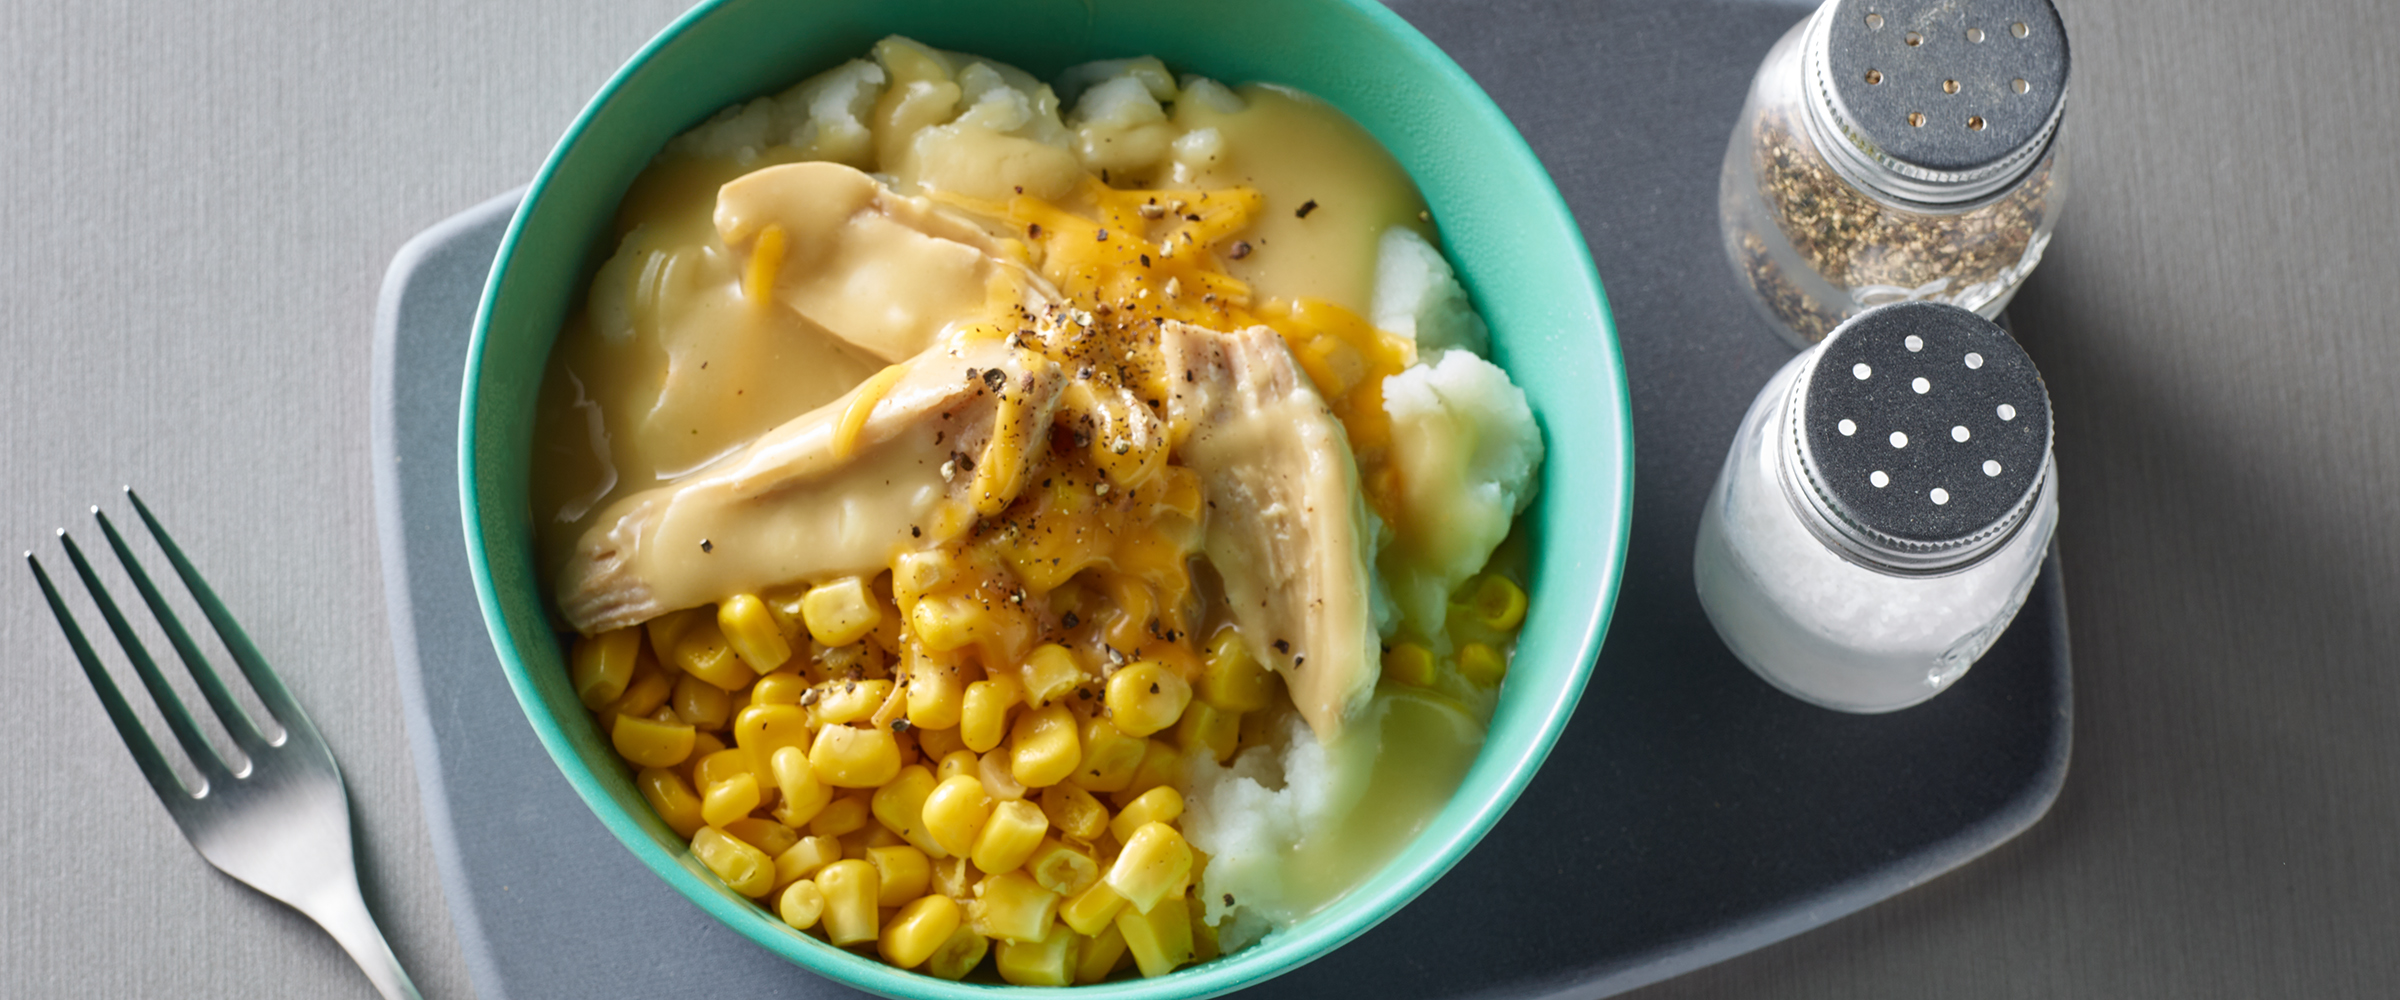 Chicken and Mashed Potato Bowl